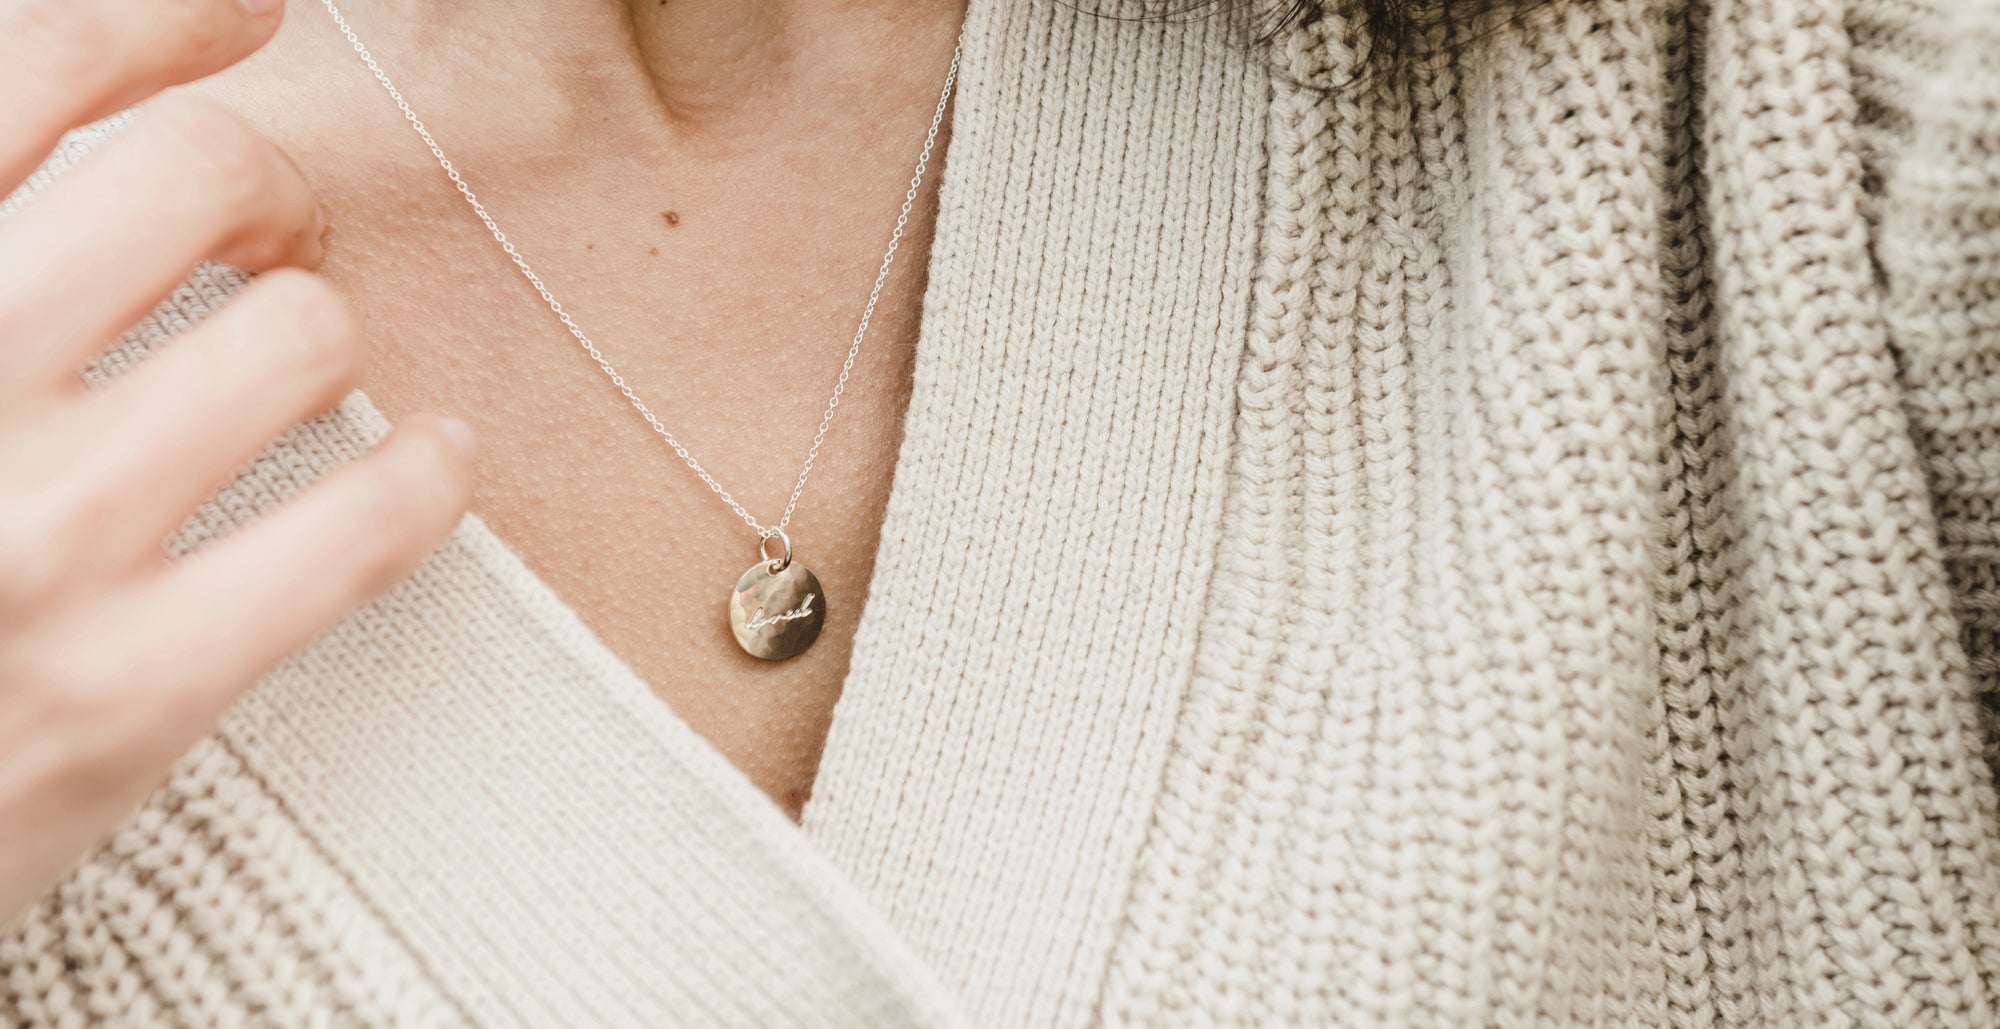 Close-up of a person wearing a beige sweater and a silver necklace with a pendant, with a hand slightly visible.